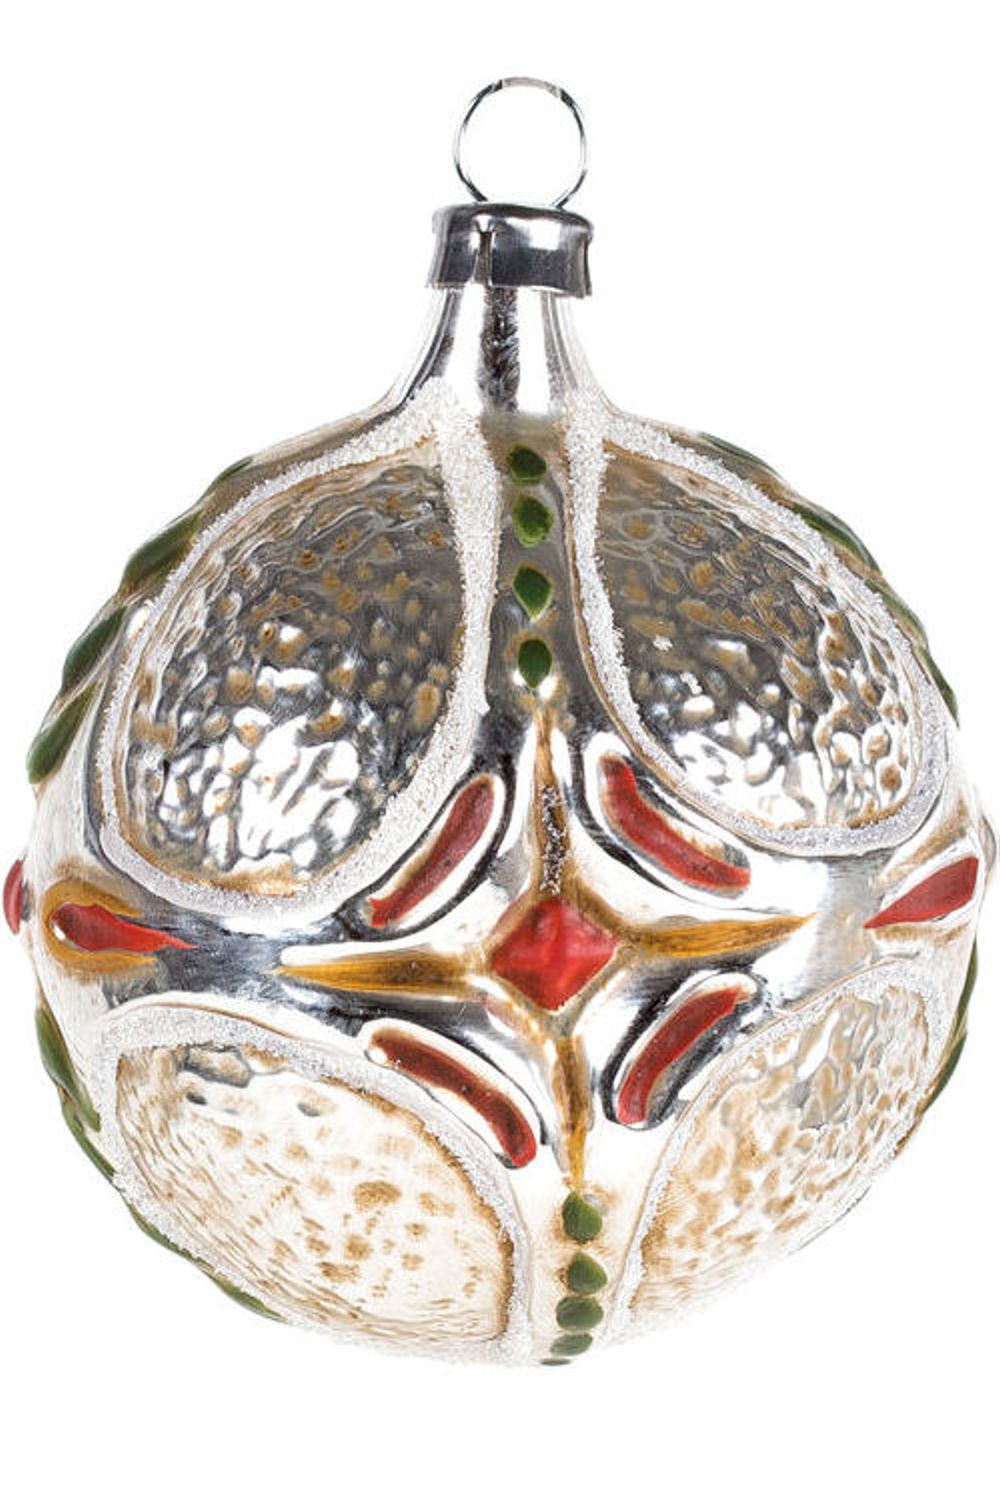 Ball with cross ornament